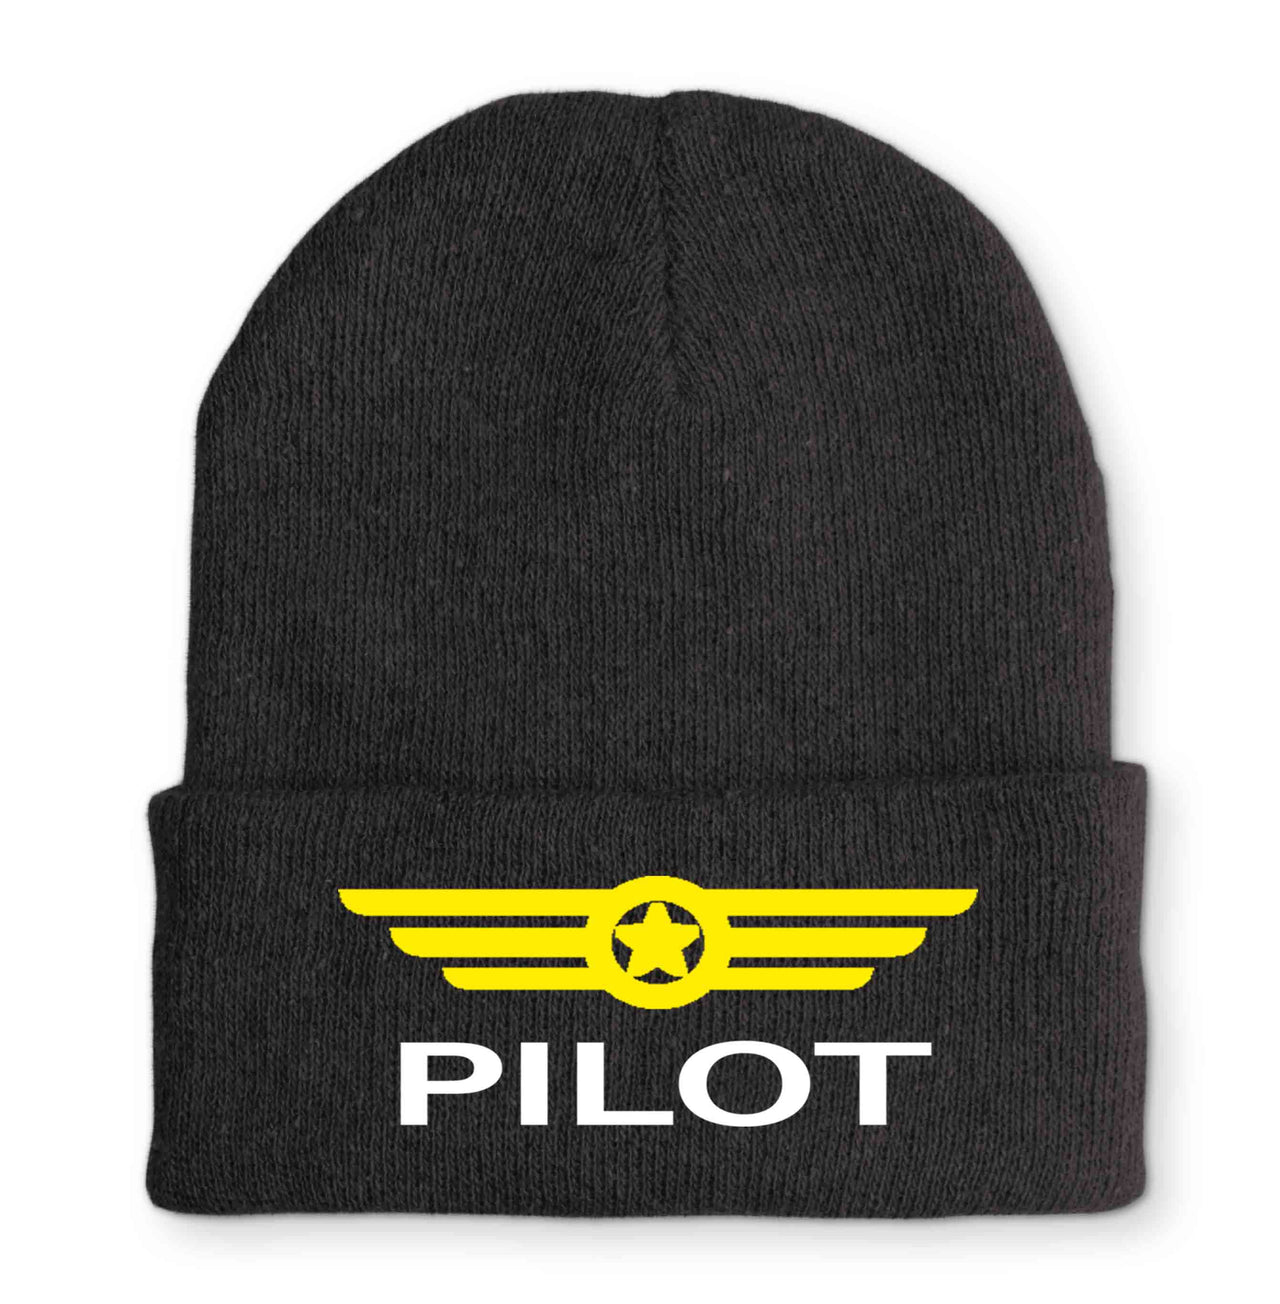 Pilot & Badge Embroidered Beanies